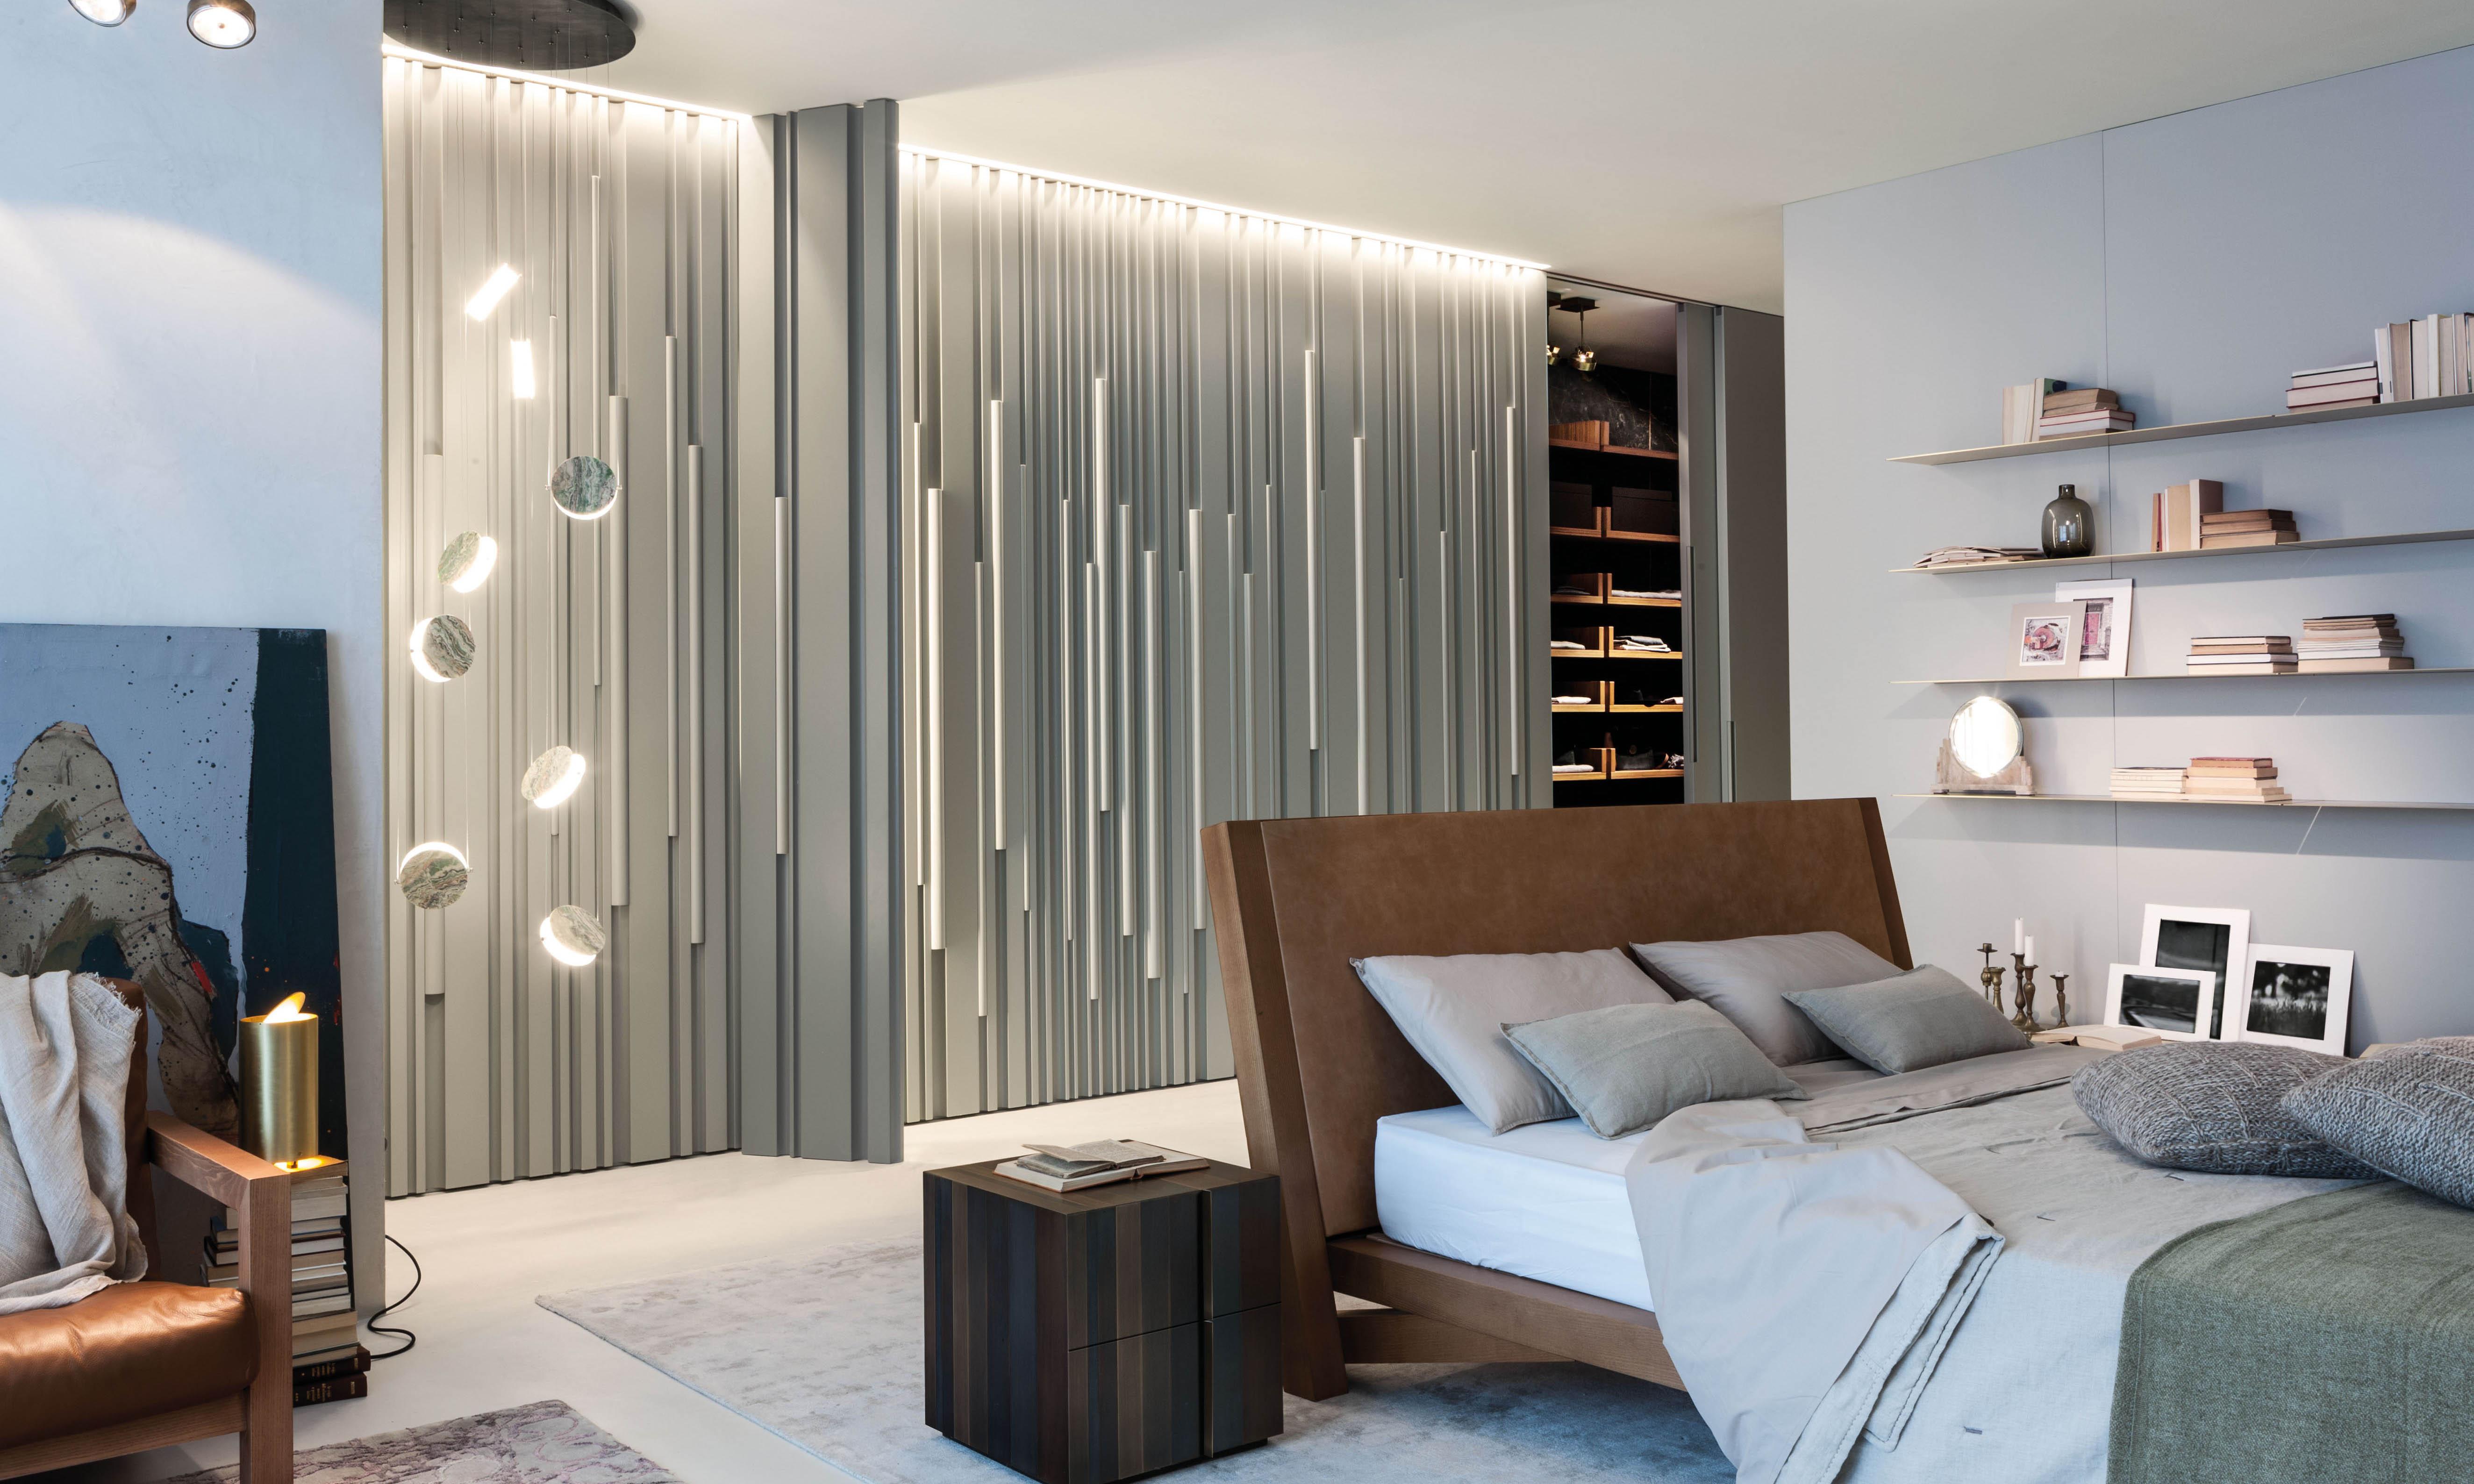 Laurameroni luxury modern integrated wardrobes and walk-in closets for a made to measure bedroom interior design and decor